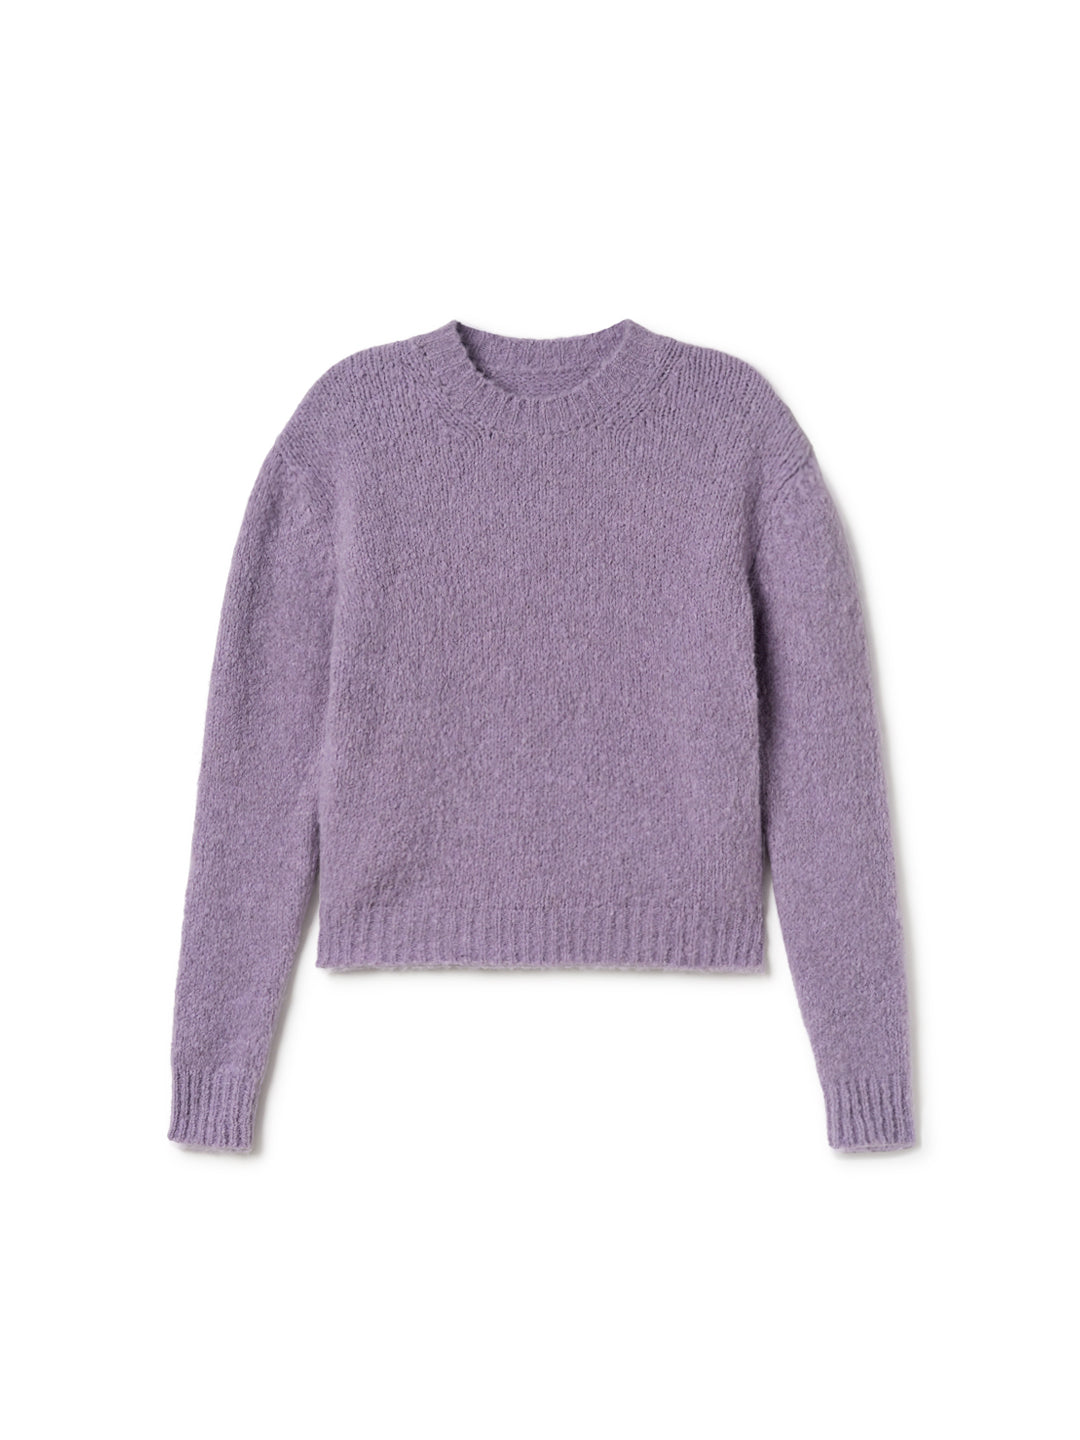 Knits Women - Kythira - Mauve | Fair Fashion by TWOTHIRDS